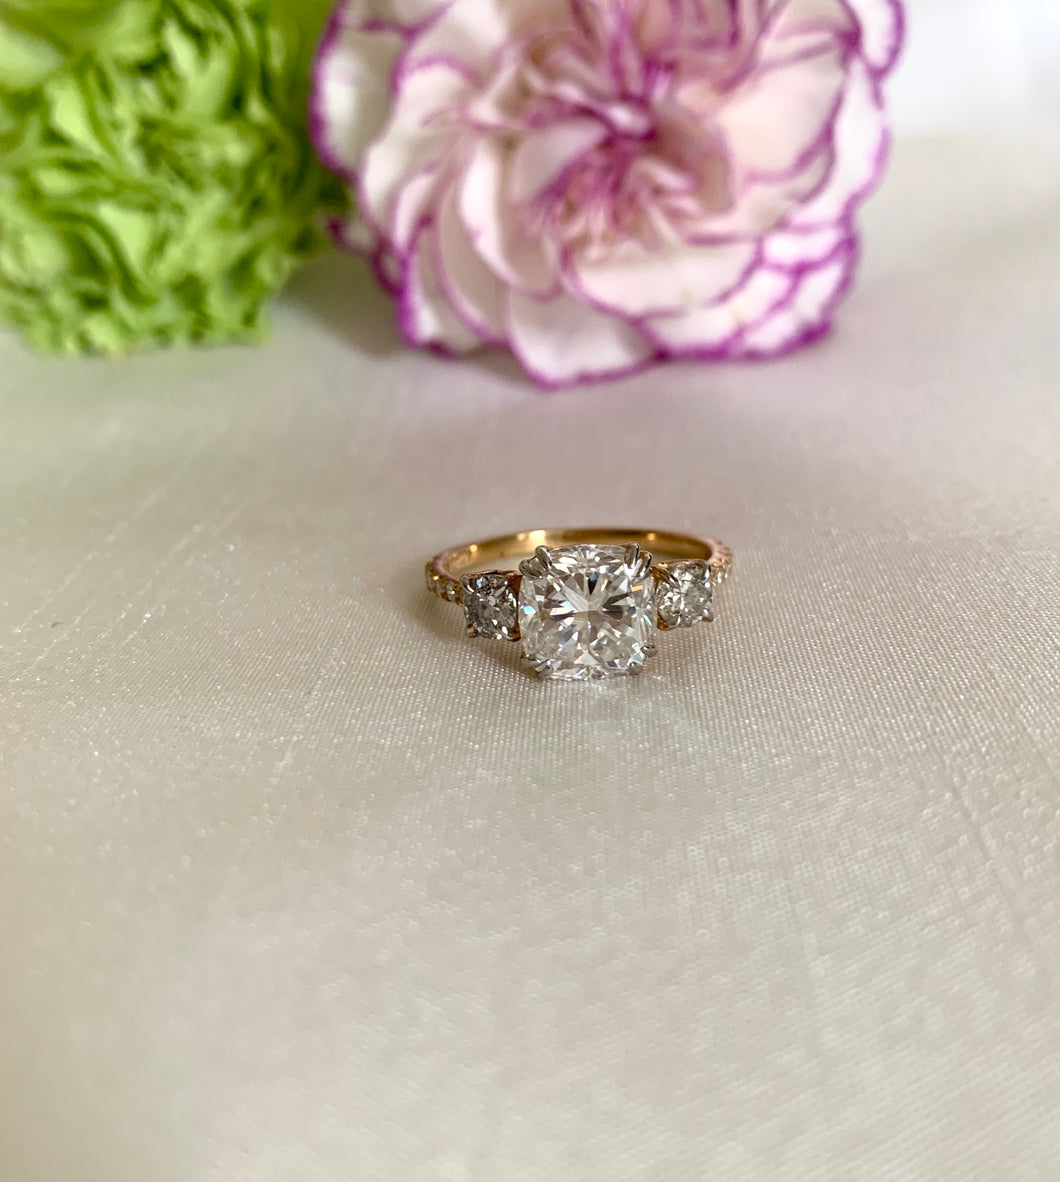 Cushion diamond ring with 2 round diamonds at the side and an additional of 6 small stones on each side too. Set in 18k yellow gold.